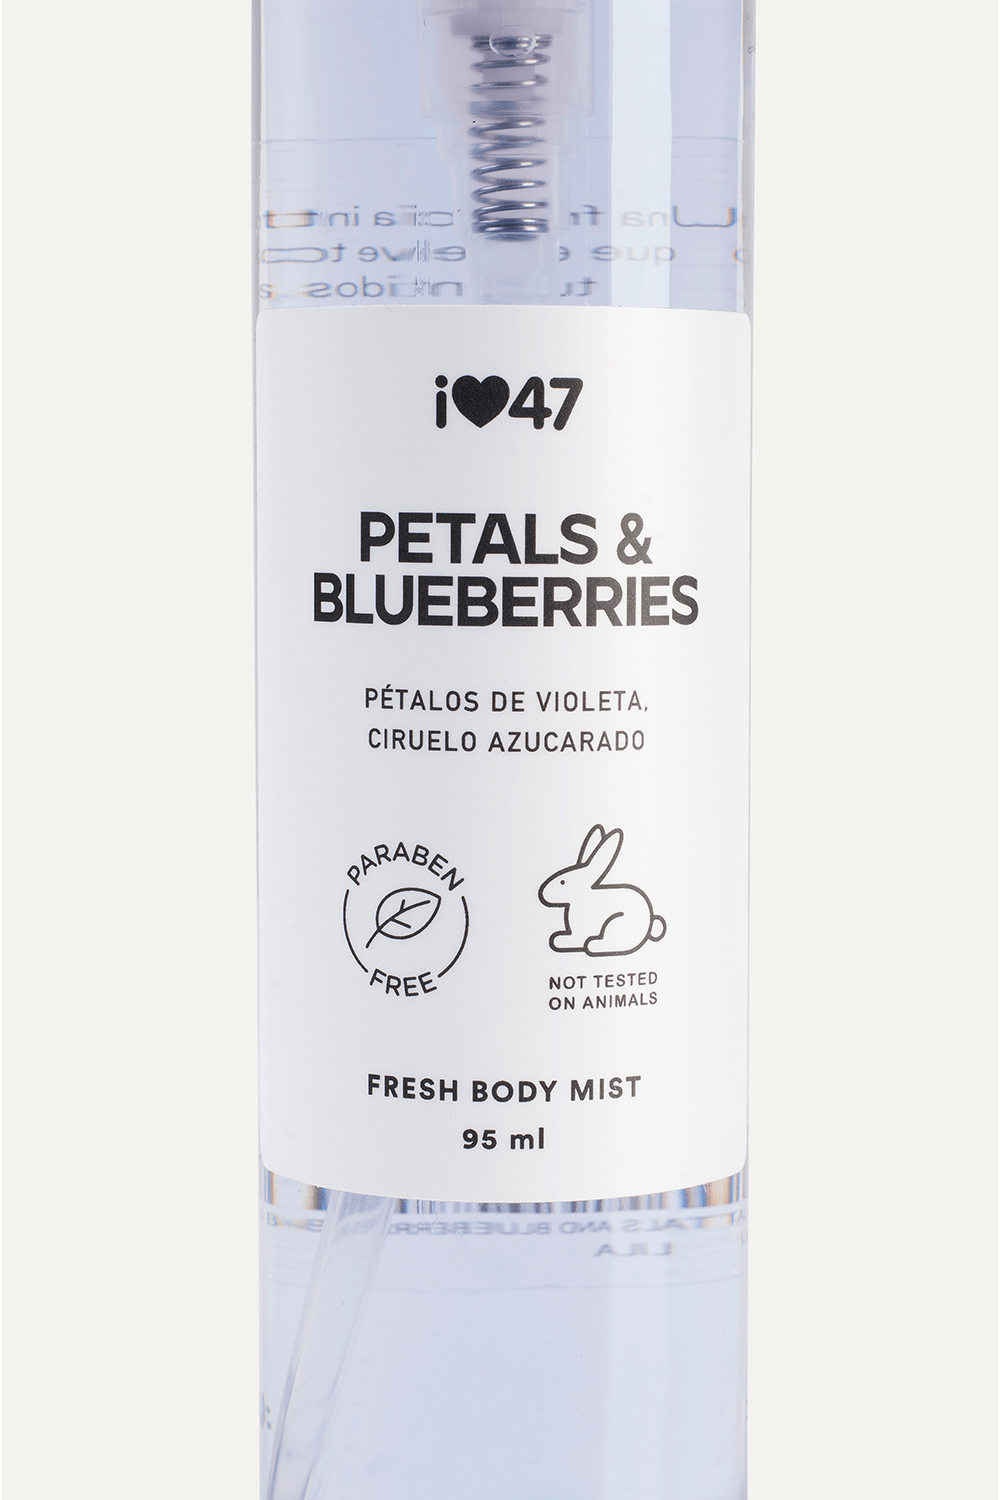 PETALS AND BLUEBERRIES BODY MIST